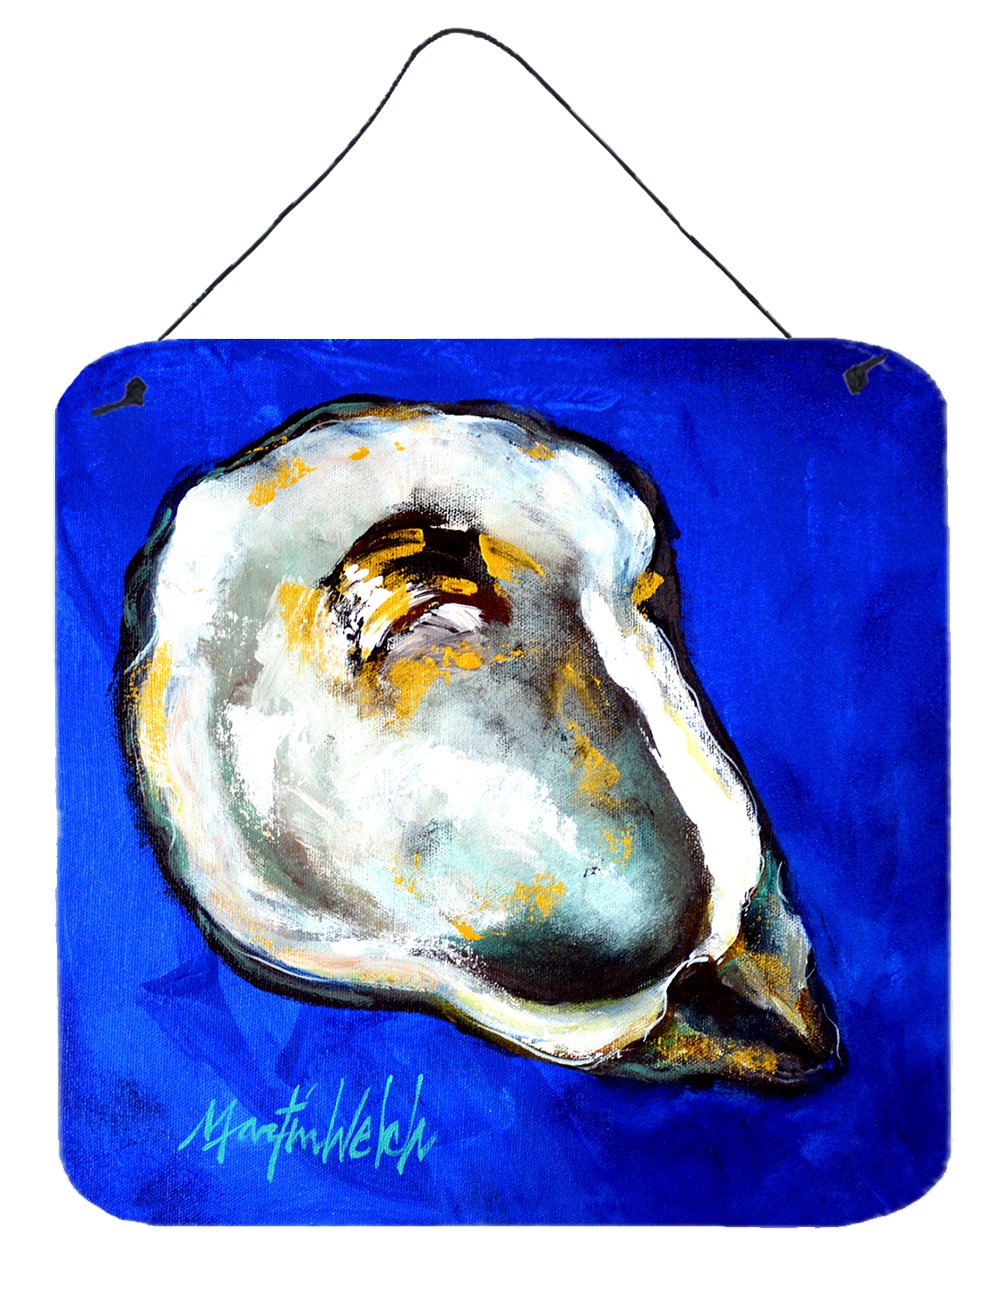 Oyster Gray Shell Wall or Door Hanging Prints MW1329DS66 by Caroline's Treasures